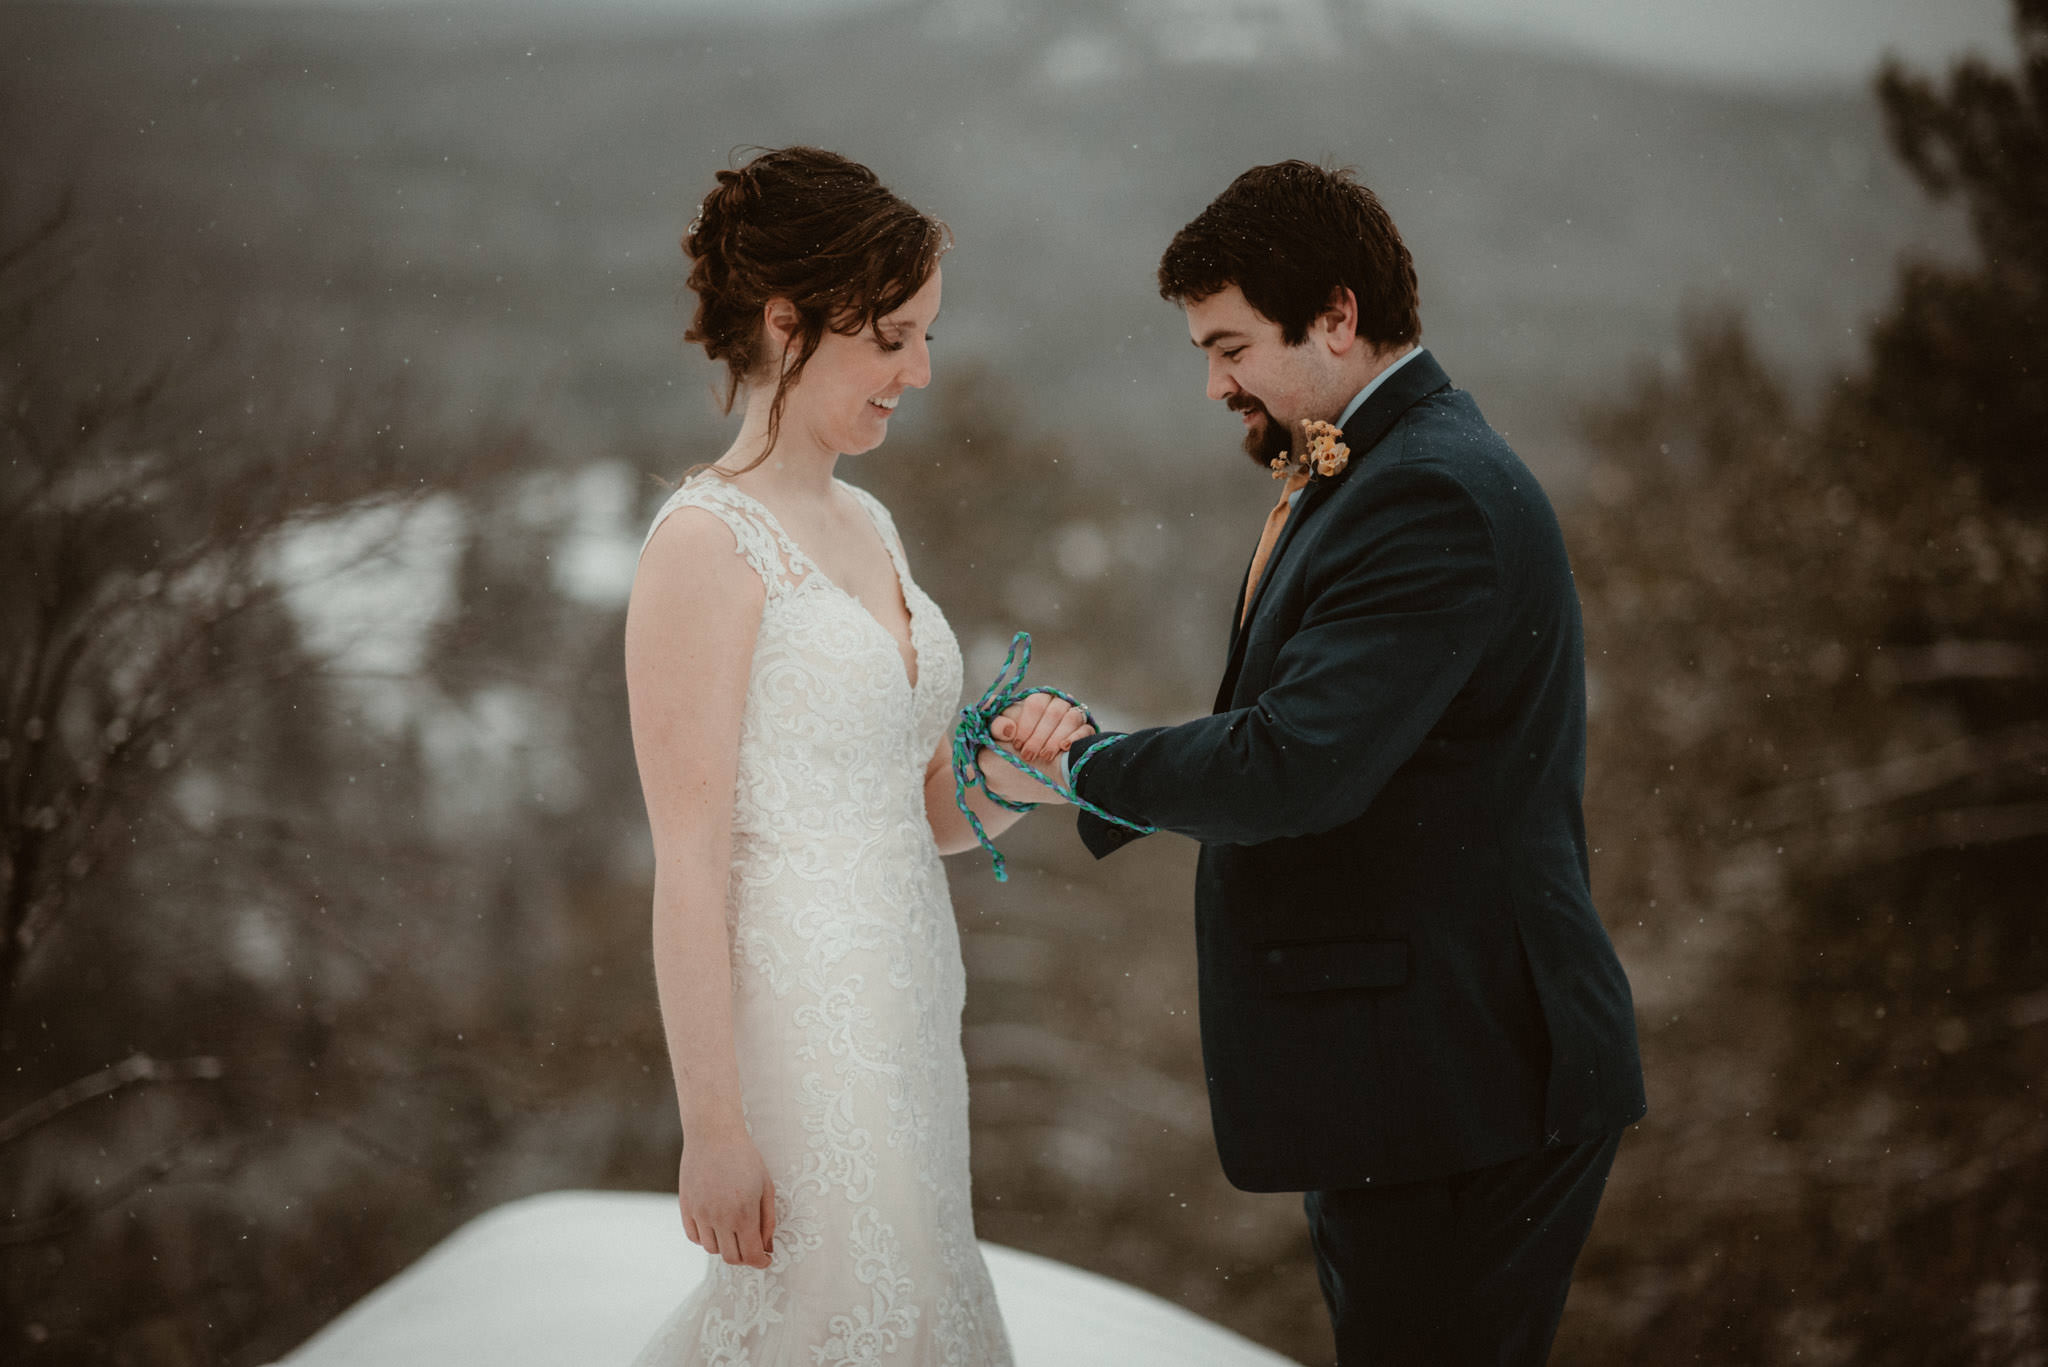 Handfasting ceremony at elopement on Sugarloaf Mountain in Marquette, MI